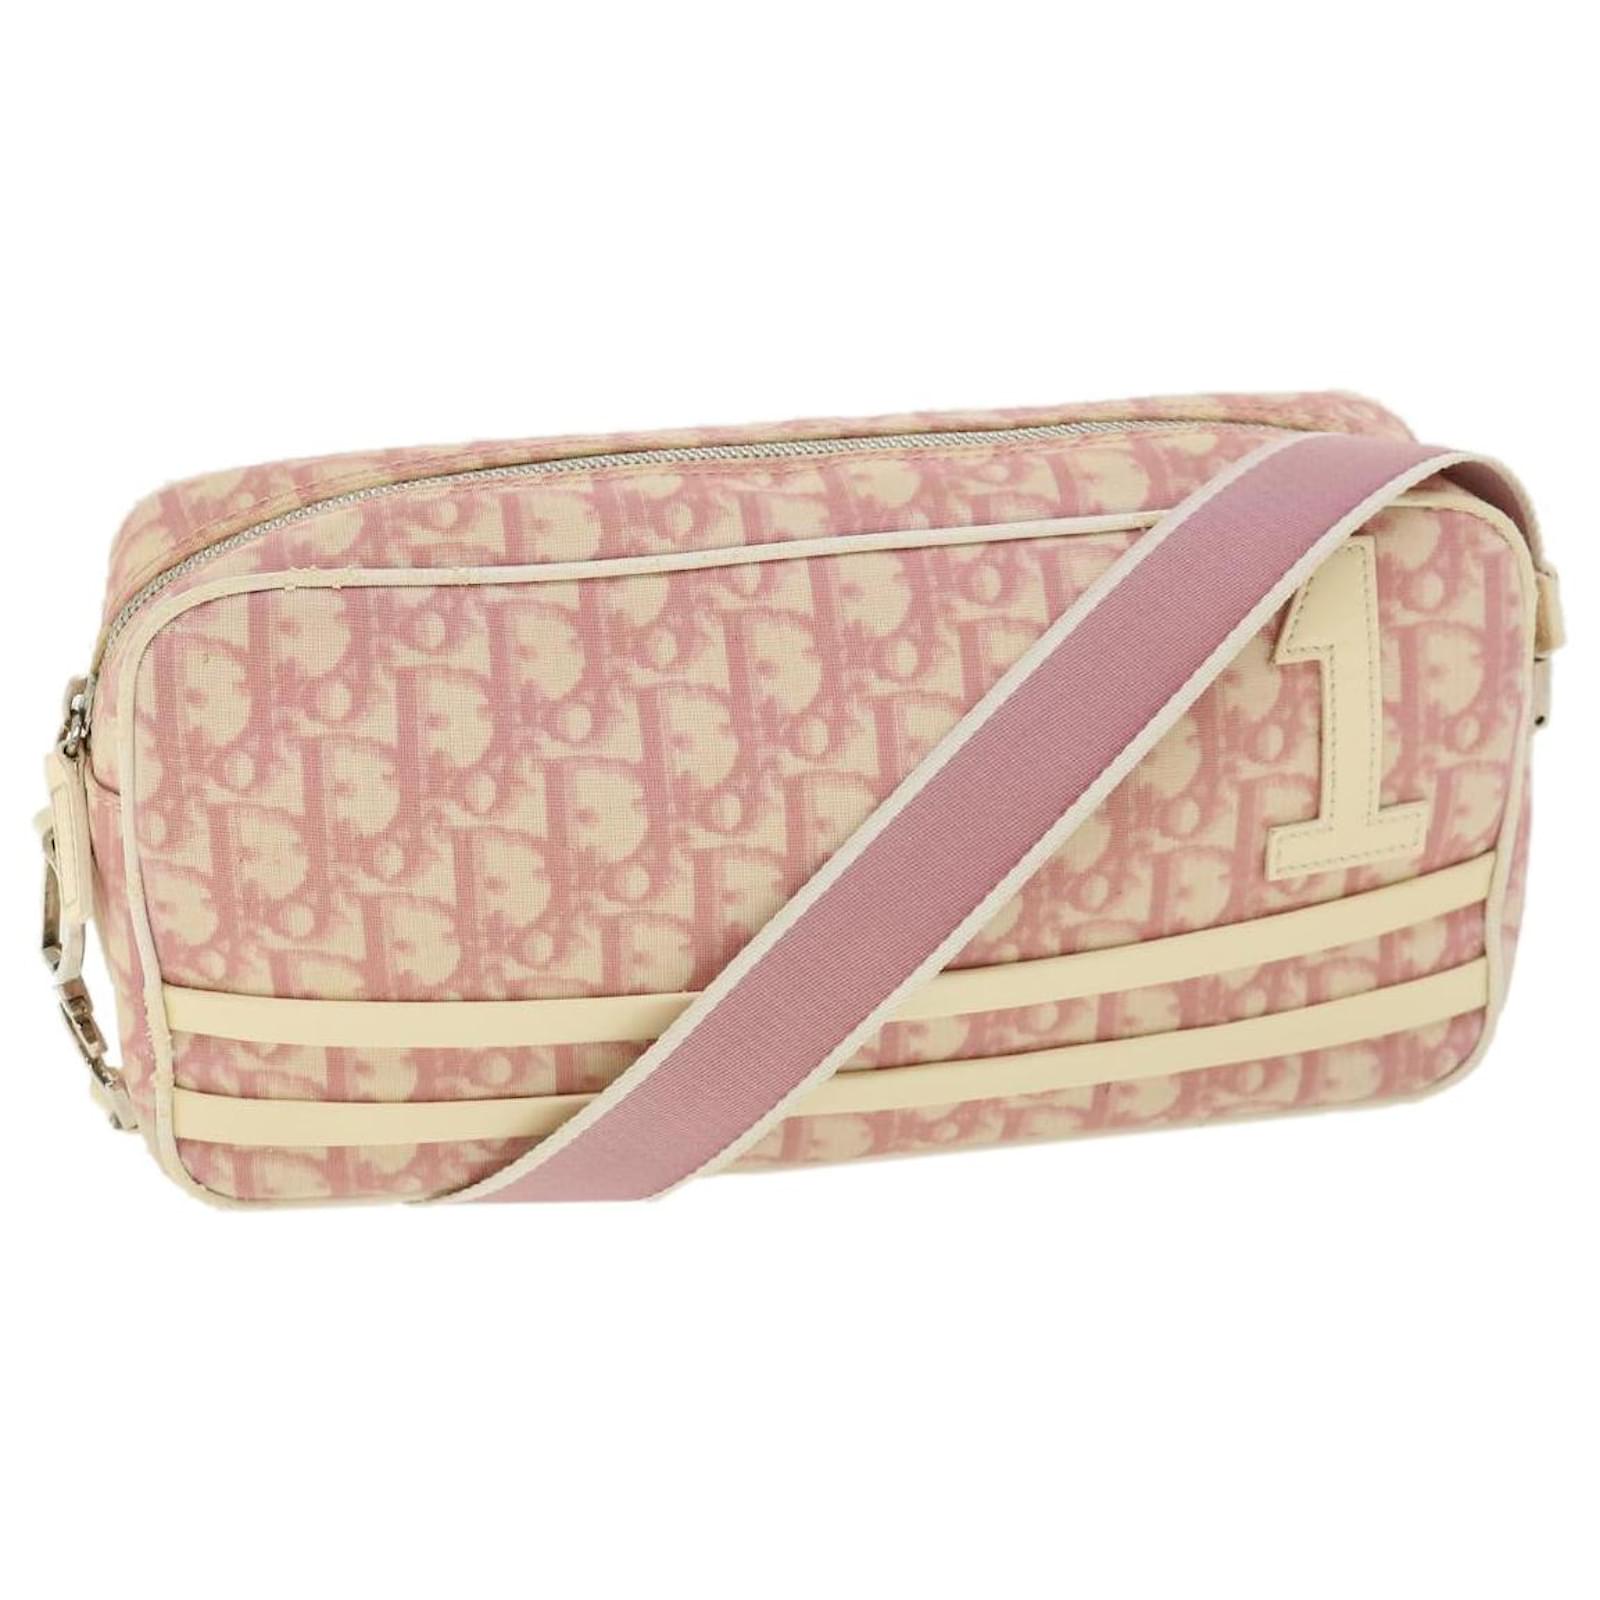 Christian Dior Saddle Trotter Hand Bag Pink Canvas Italy